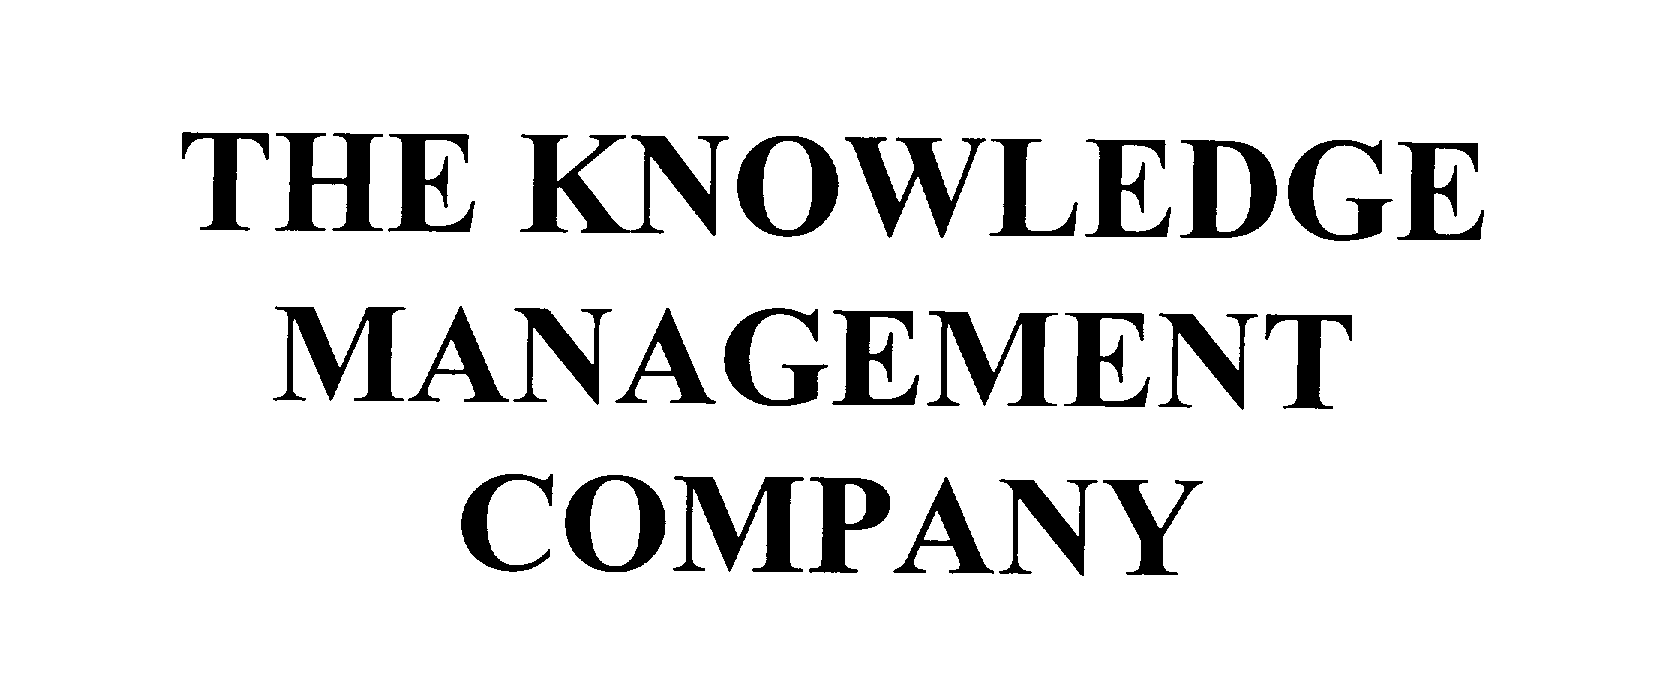 THE KNOWLEDGE MANAGEMENT COMPANY